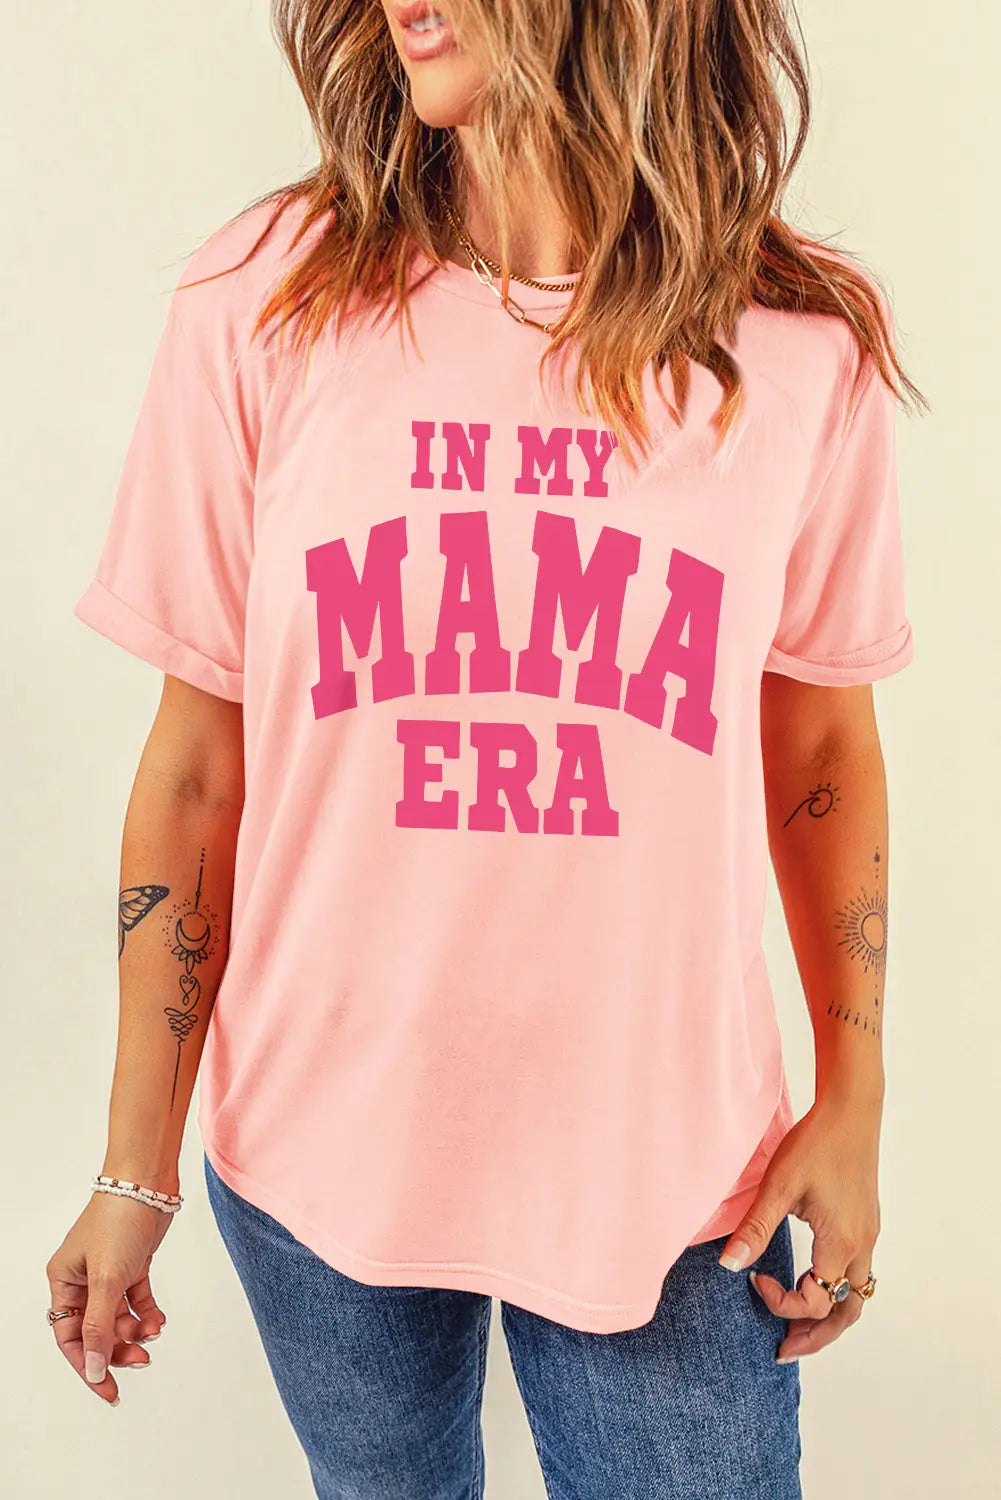 Pink in my mama era crew neck graphic t shirt - s 62% polyester + 32% cotton + 6% elastane t - shirts